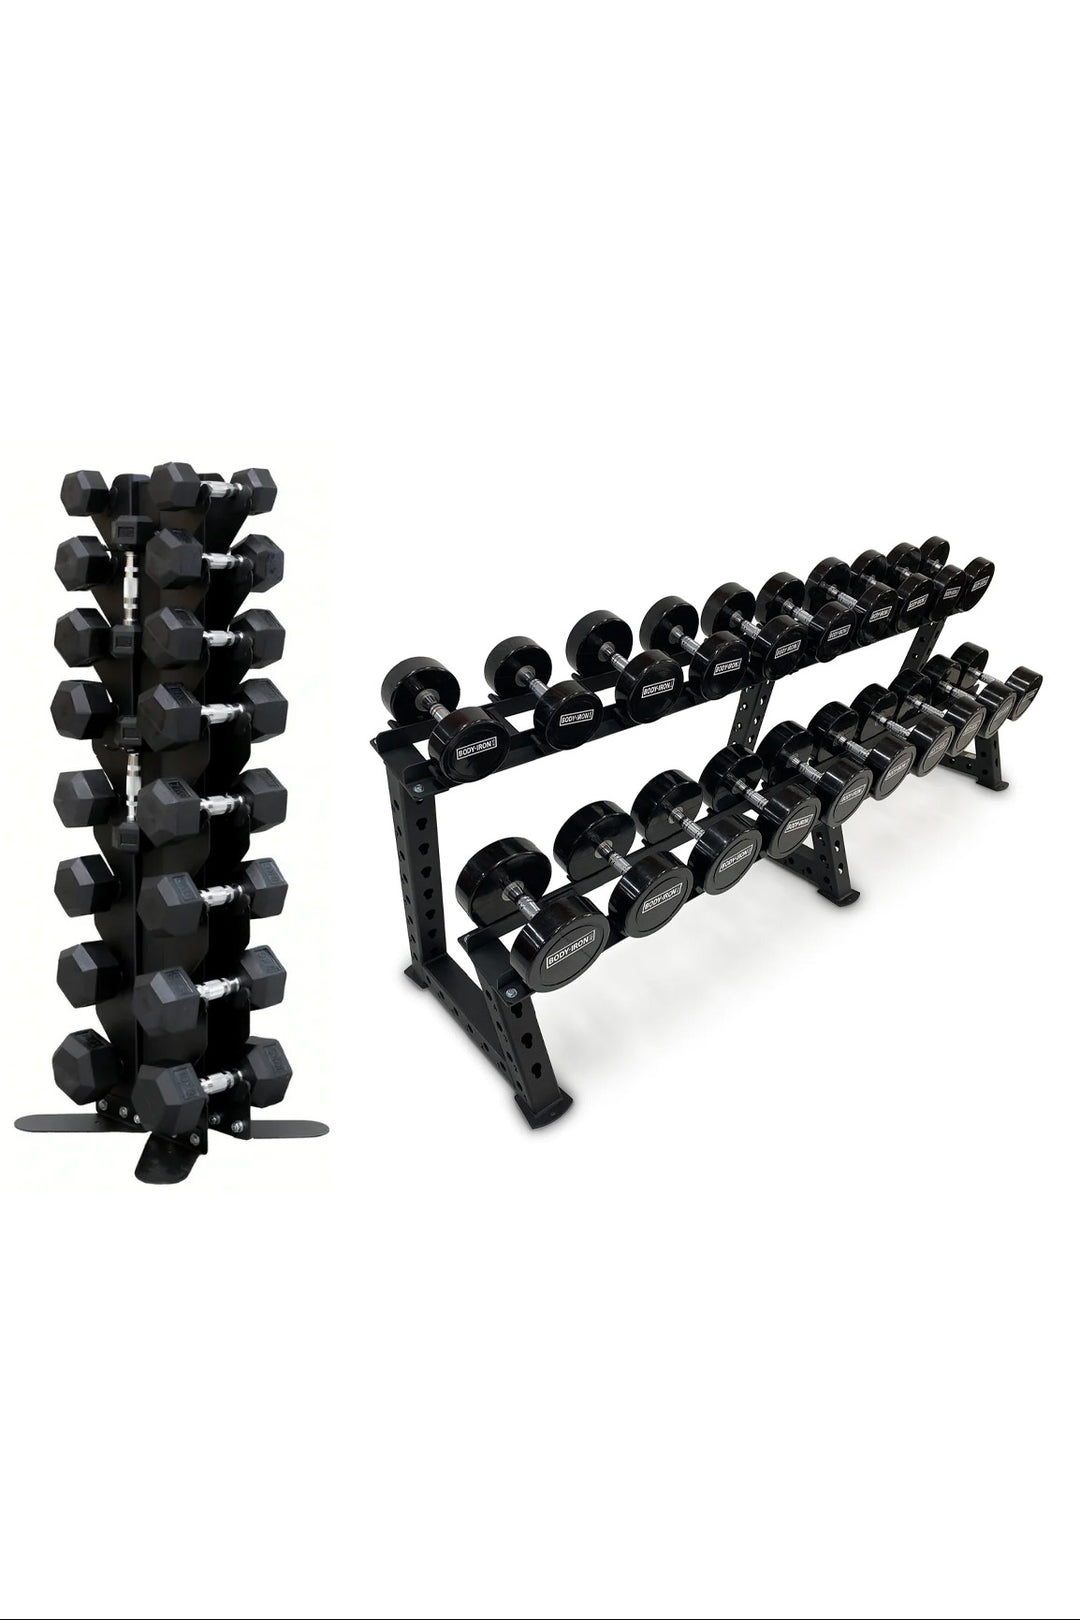 Body Iron 585kg Commercial Dumbbell Package